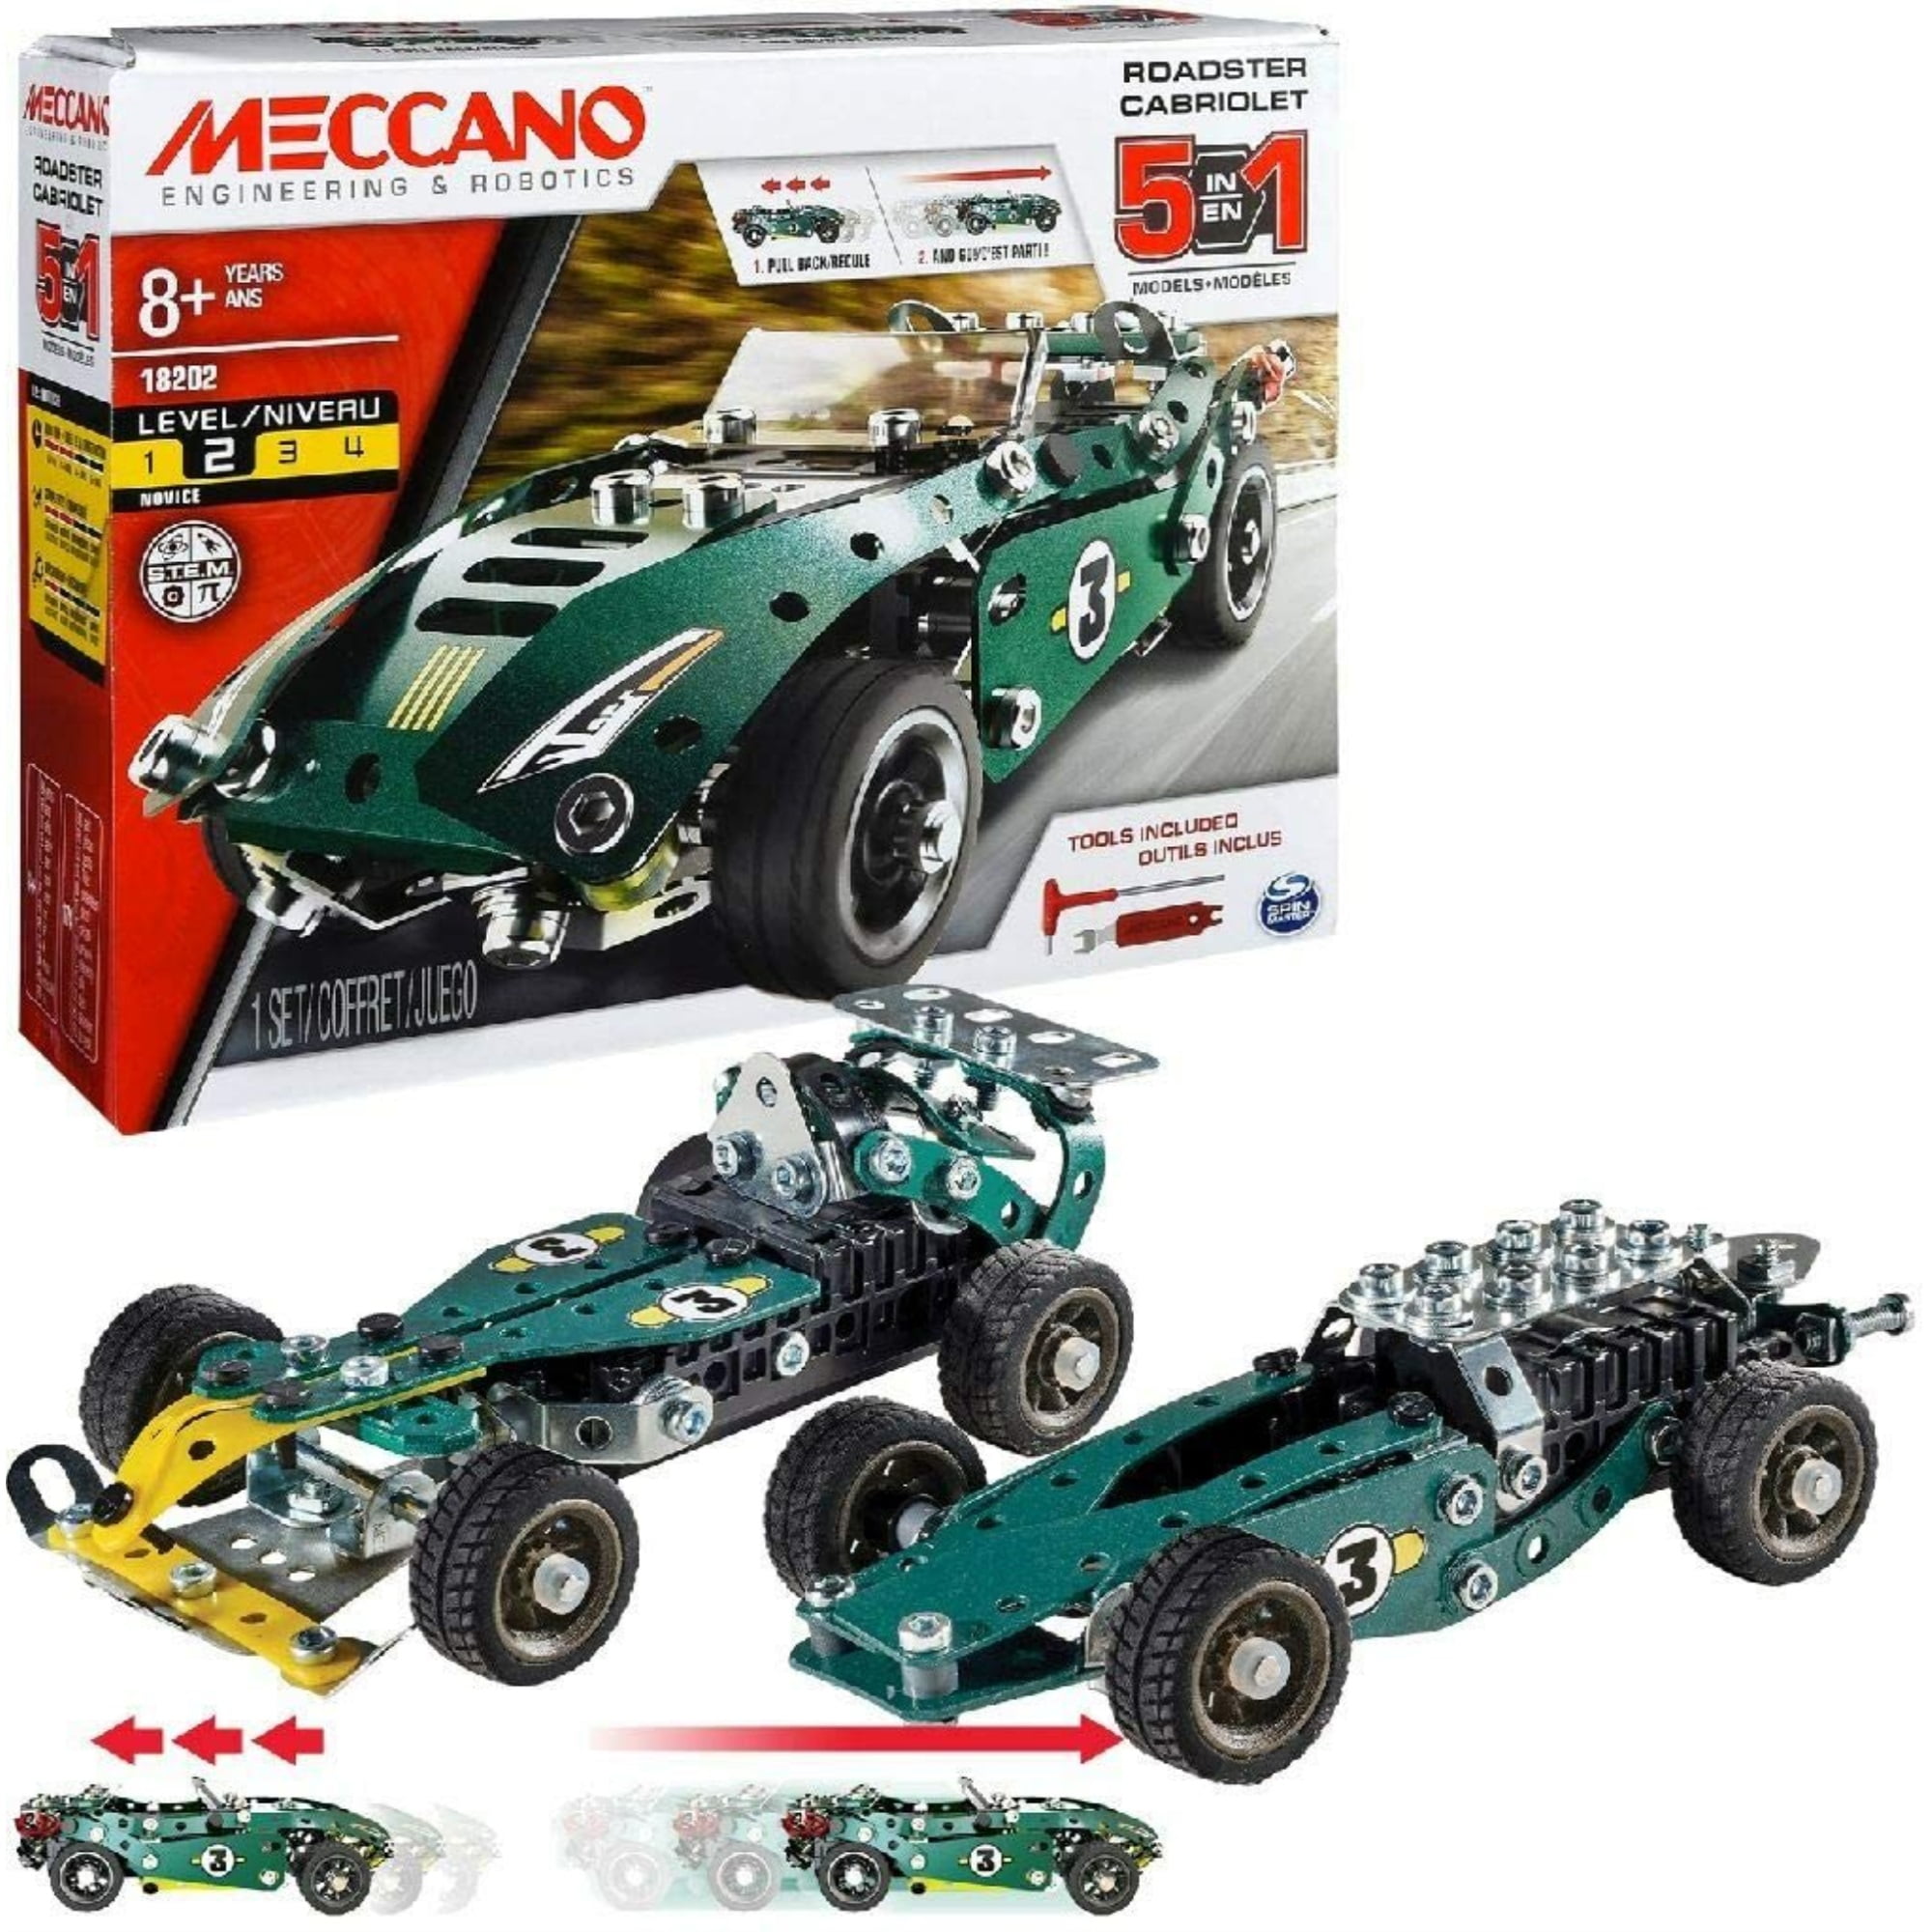 Meccano by Erector, 5 in 1 Model Building Set - Motorcycles, STEM  Engineering Education Toy, 174 Pieces, For Ages 8 and up